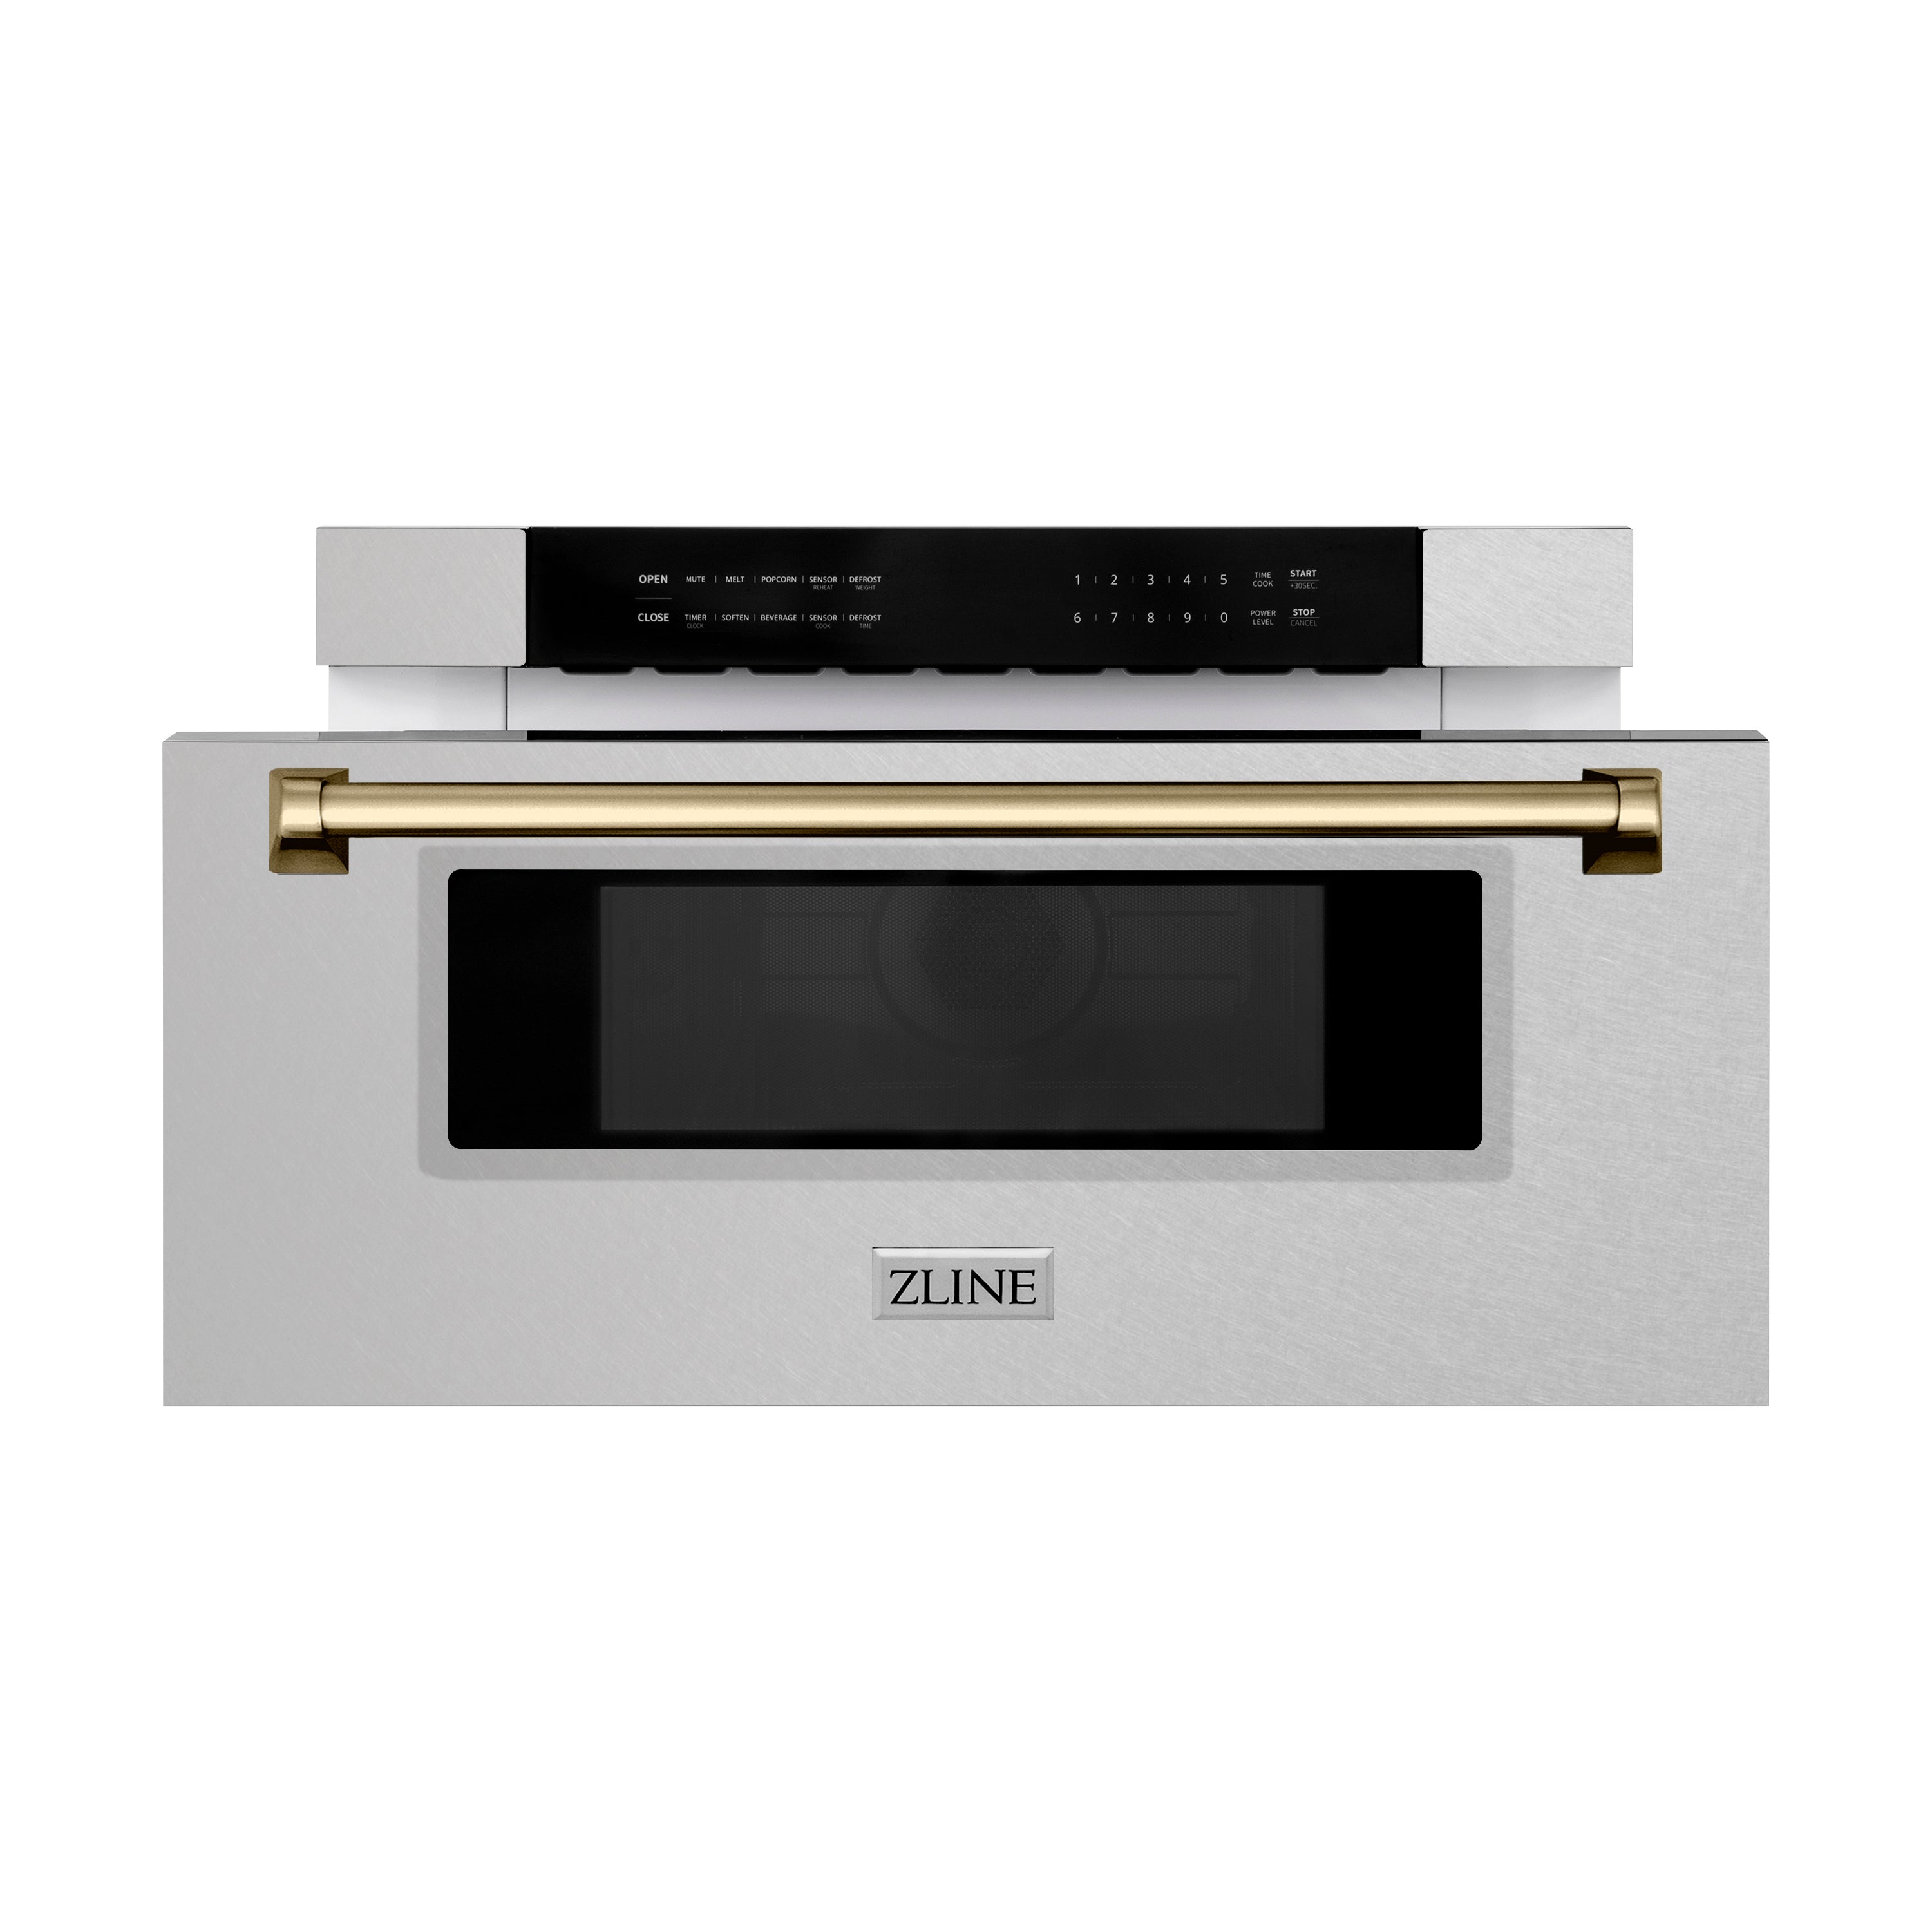 ZLINE Autograph Edition 30" 1.2 cu. ft. Built-In Microwave Drawer in Fingerprint Resistant Stainless Steel with Champagne Bronze Accents